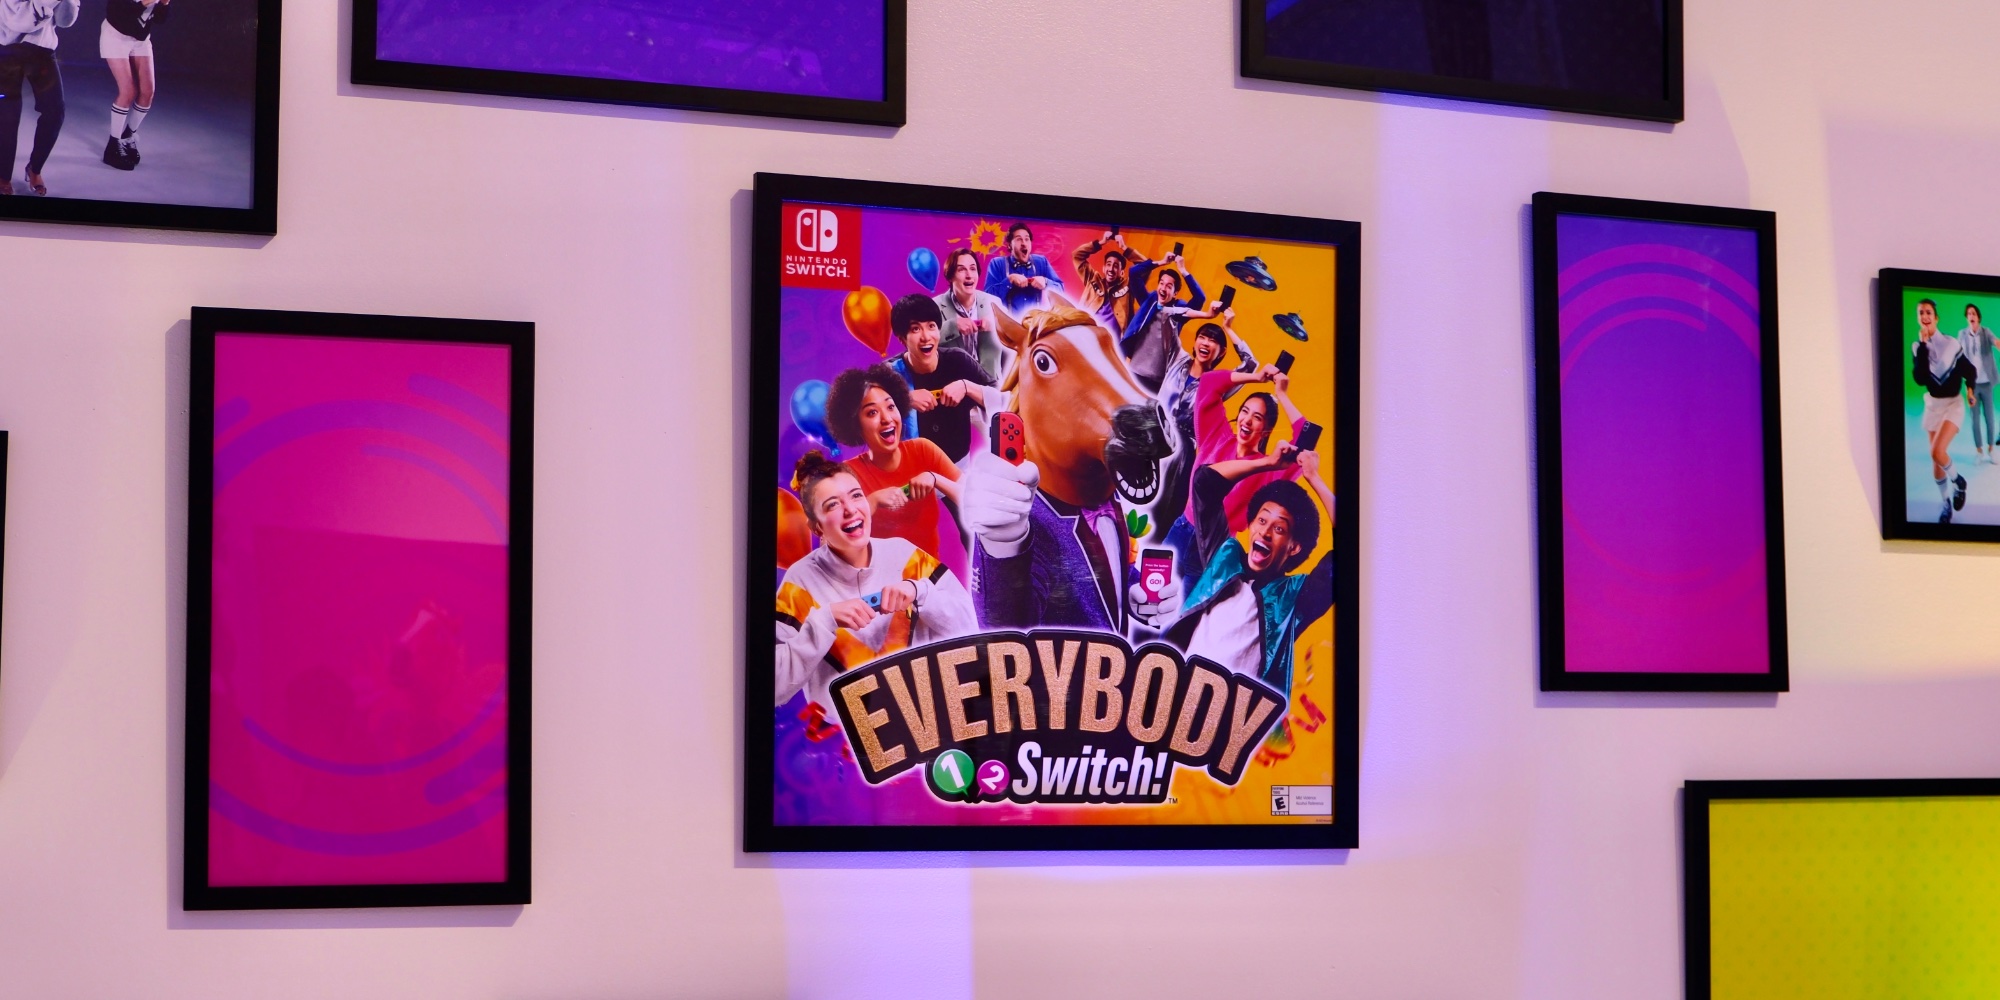 Everybody 1-2 Switch! first impressions on the new party game